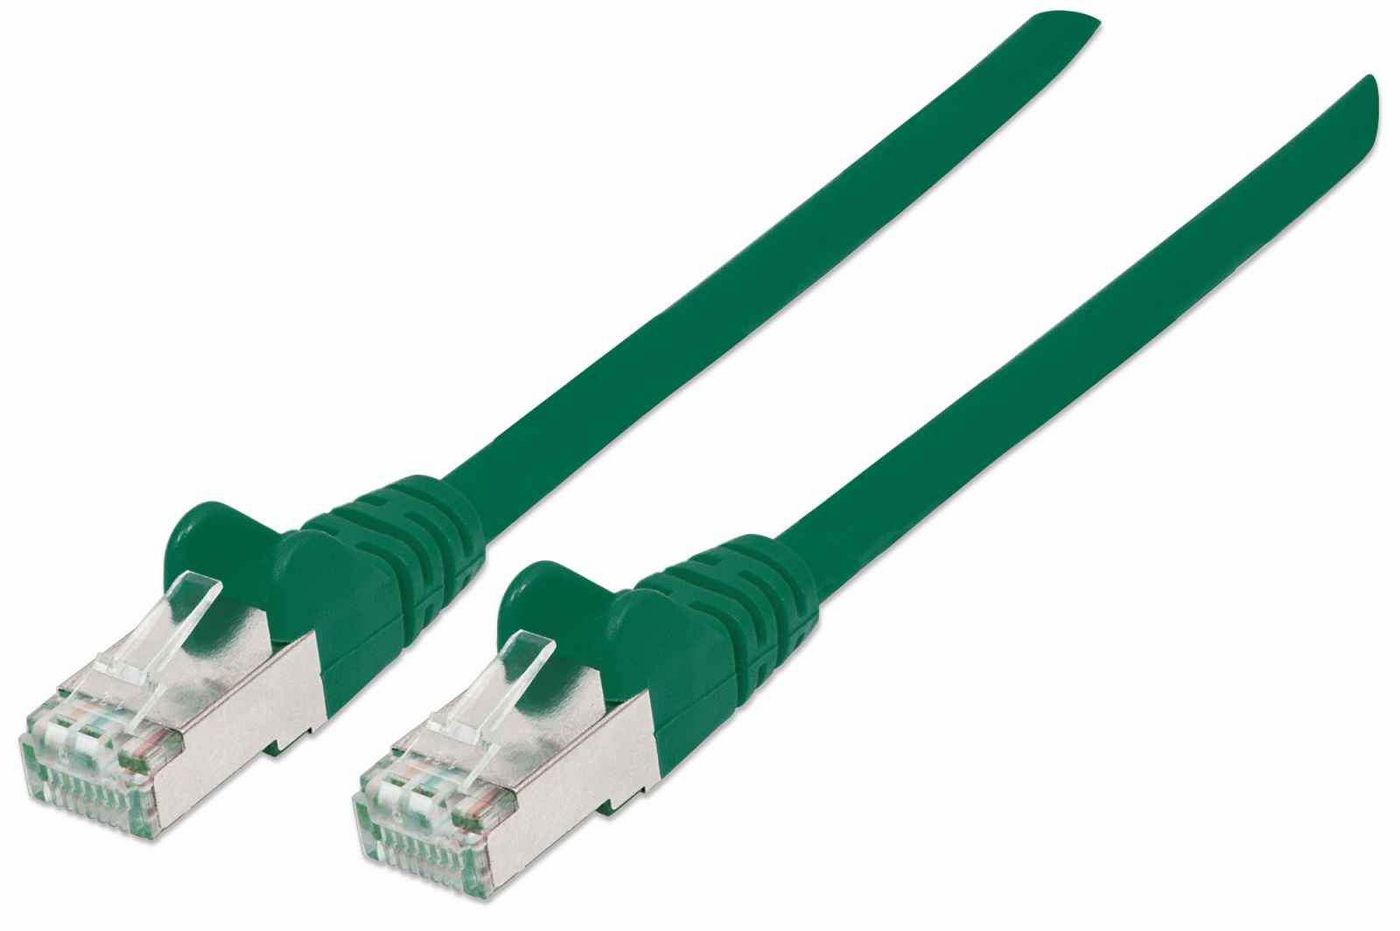 Intellinet 740968 High Performance Network Cable 